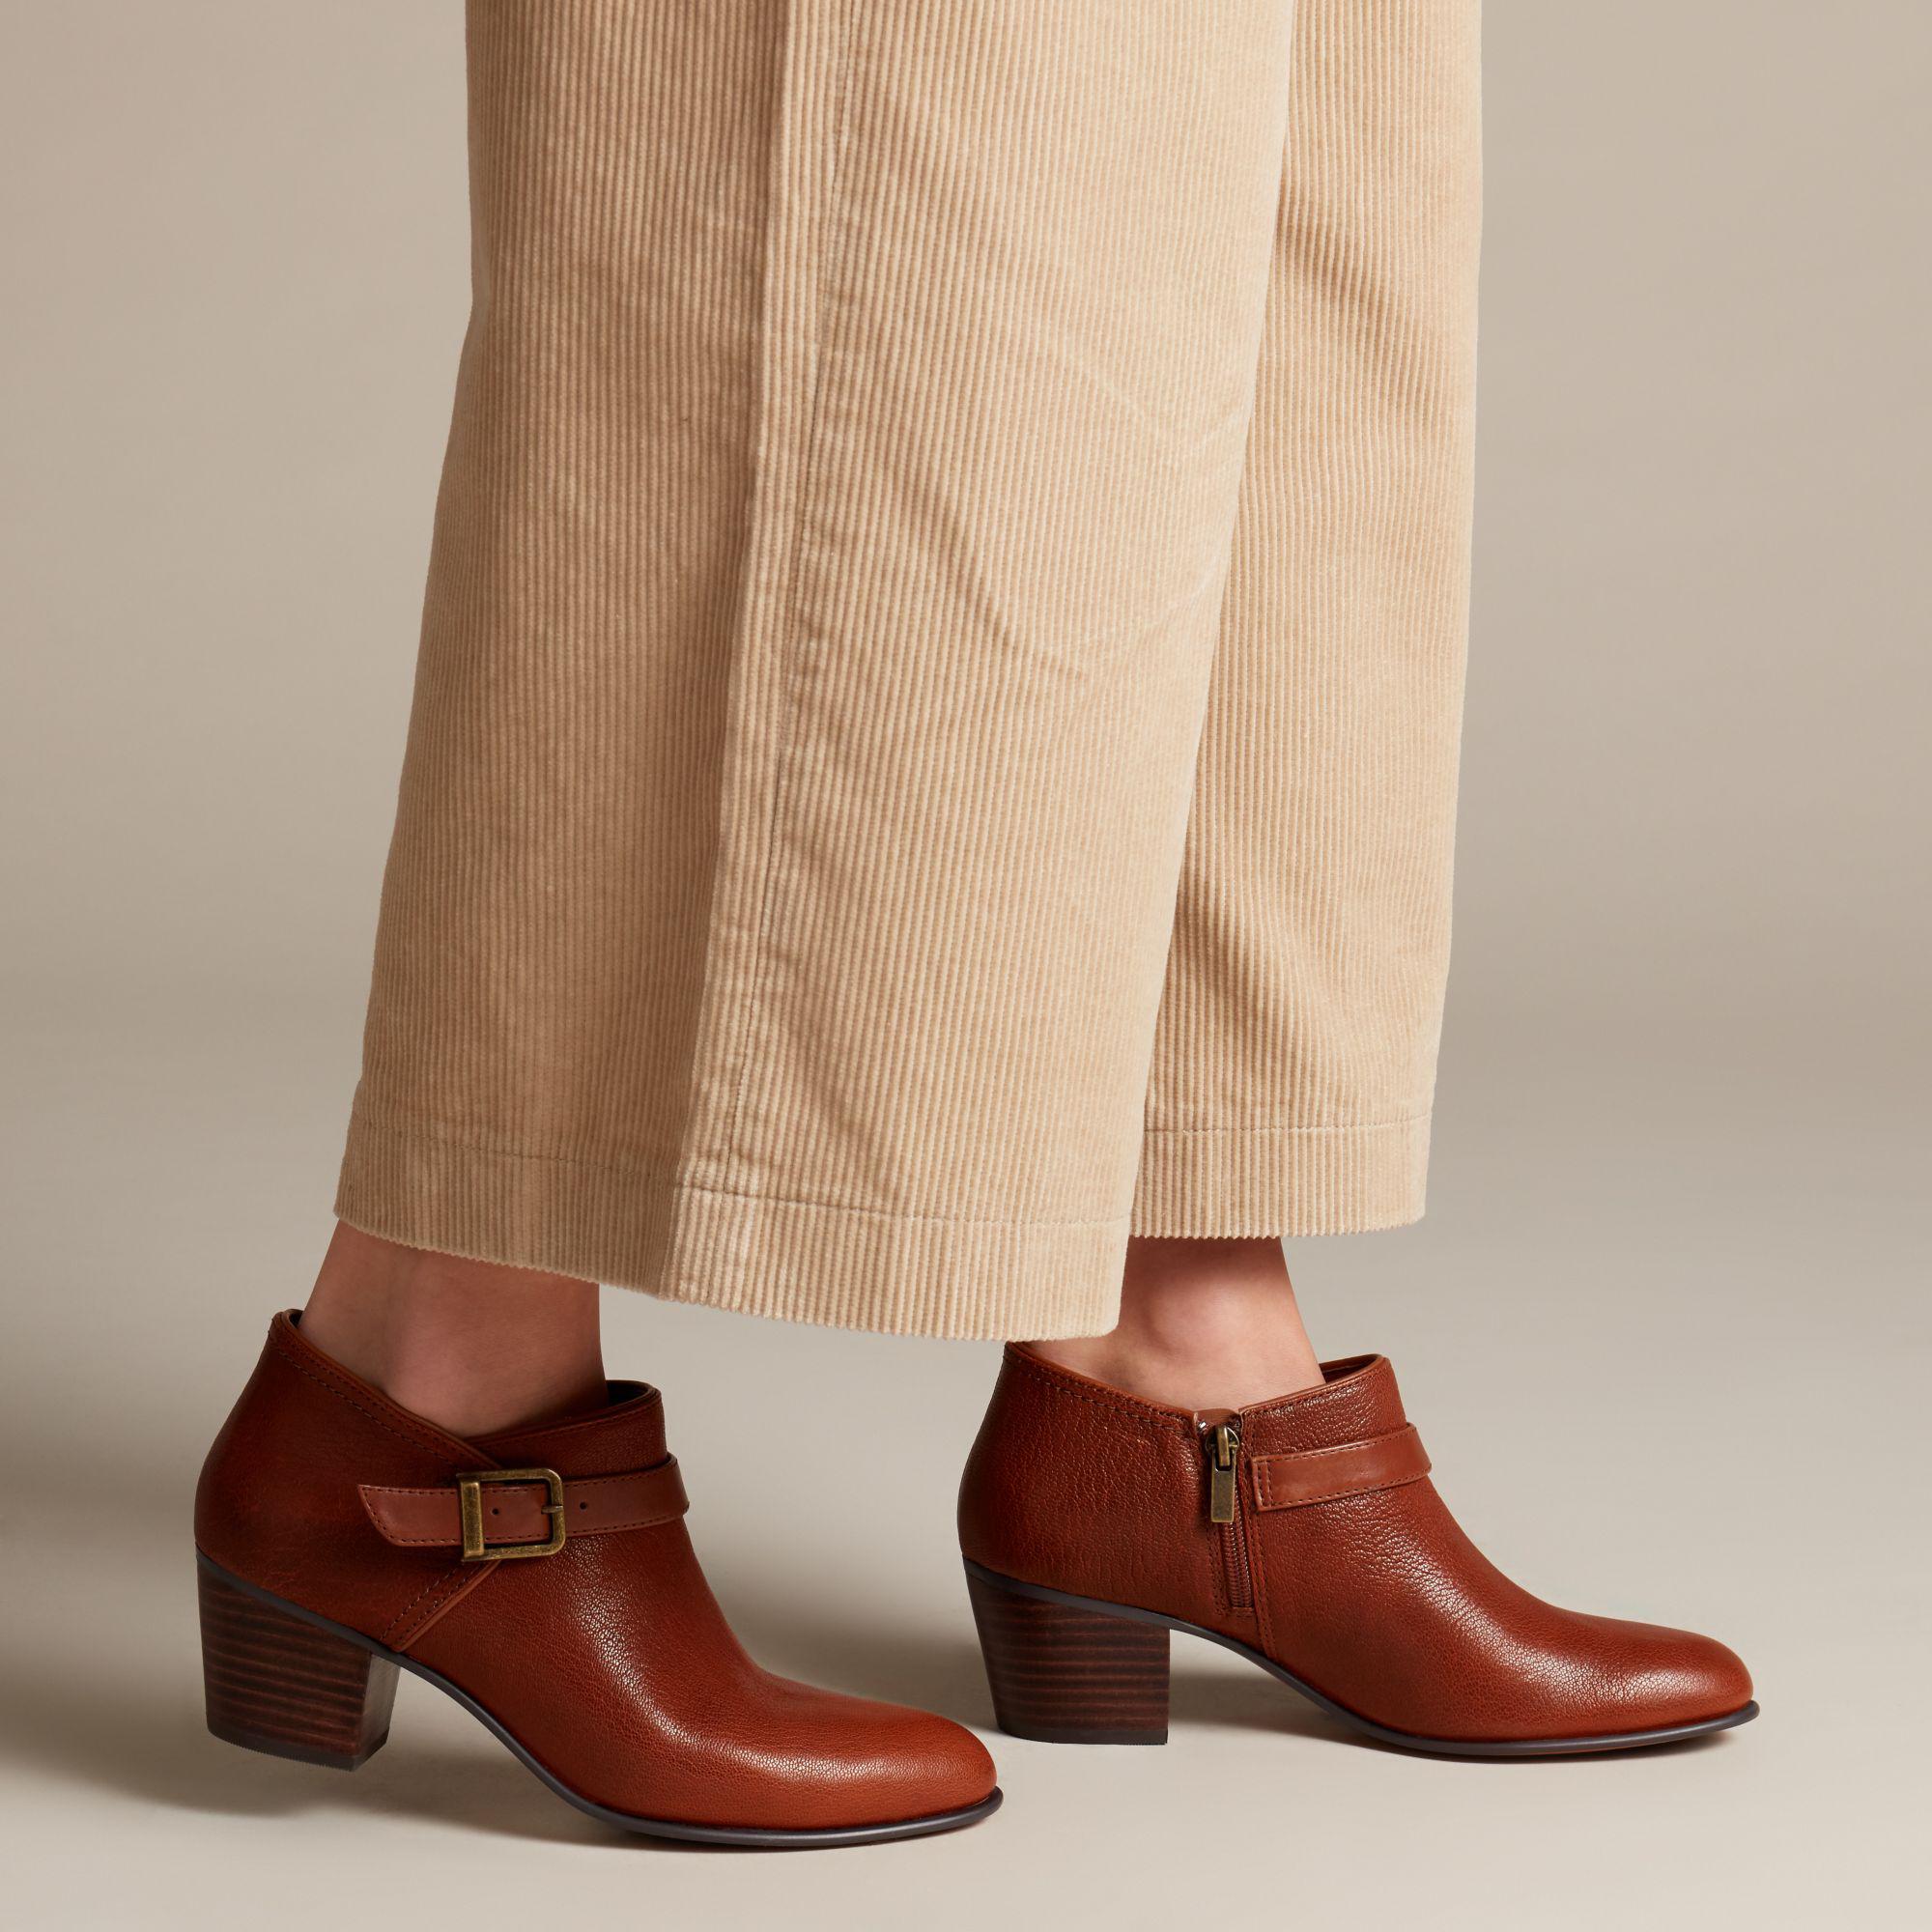 clarks maypearl milla ankle boot